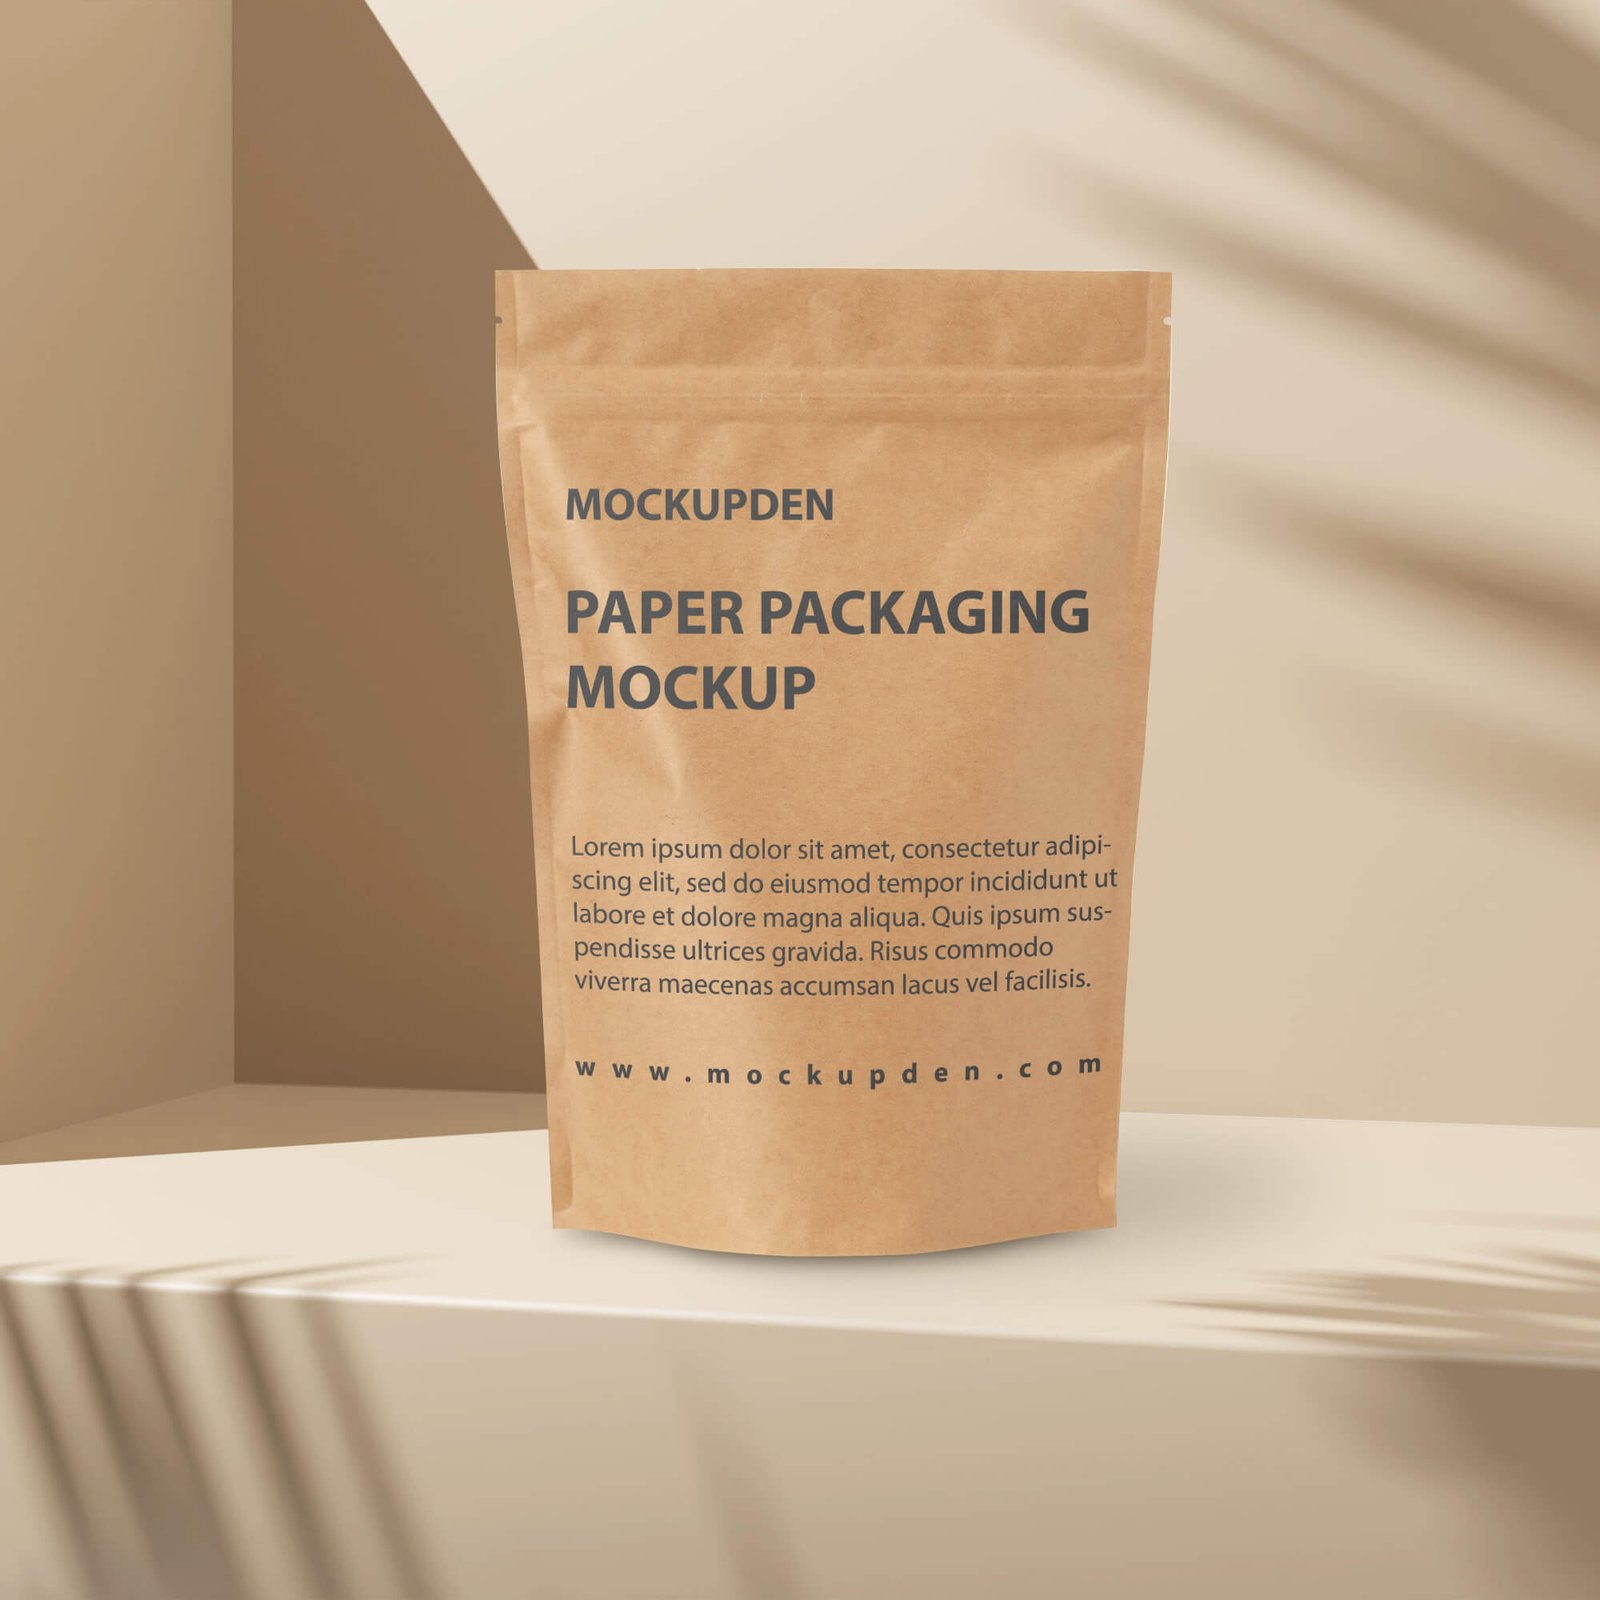 Free Paper Packaging Mockup PSD Template